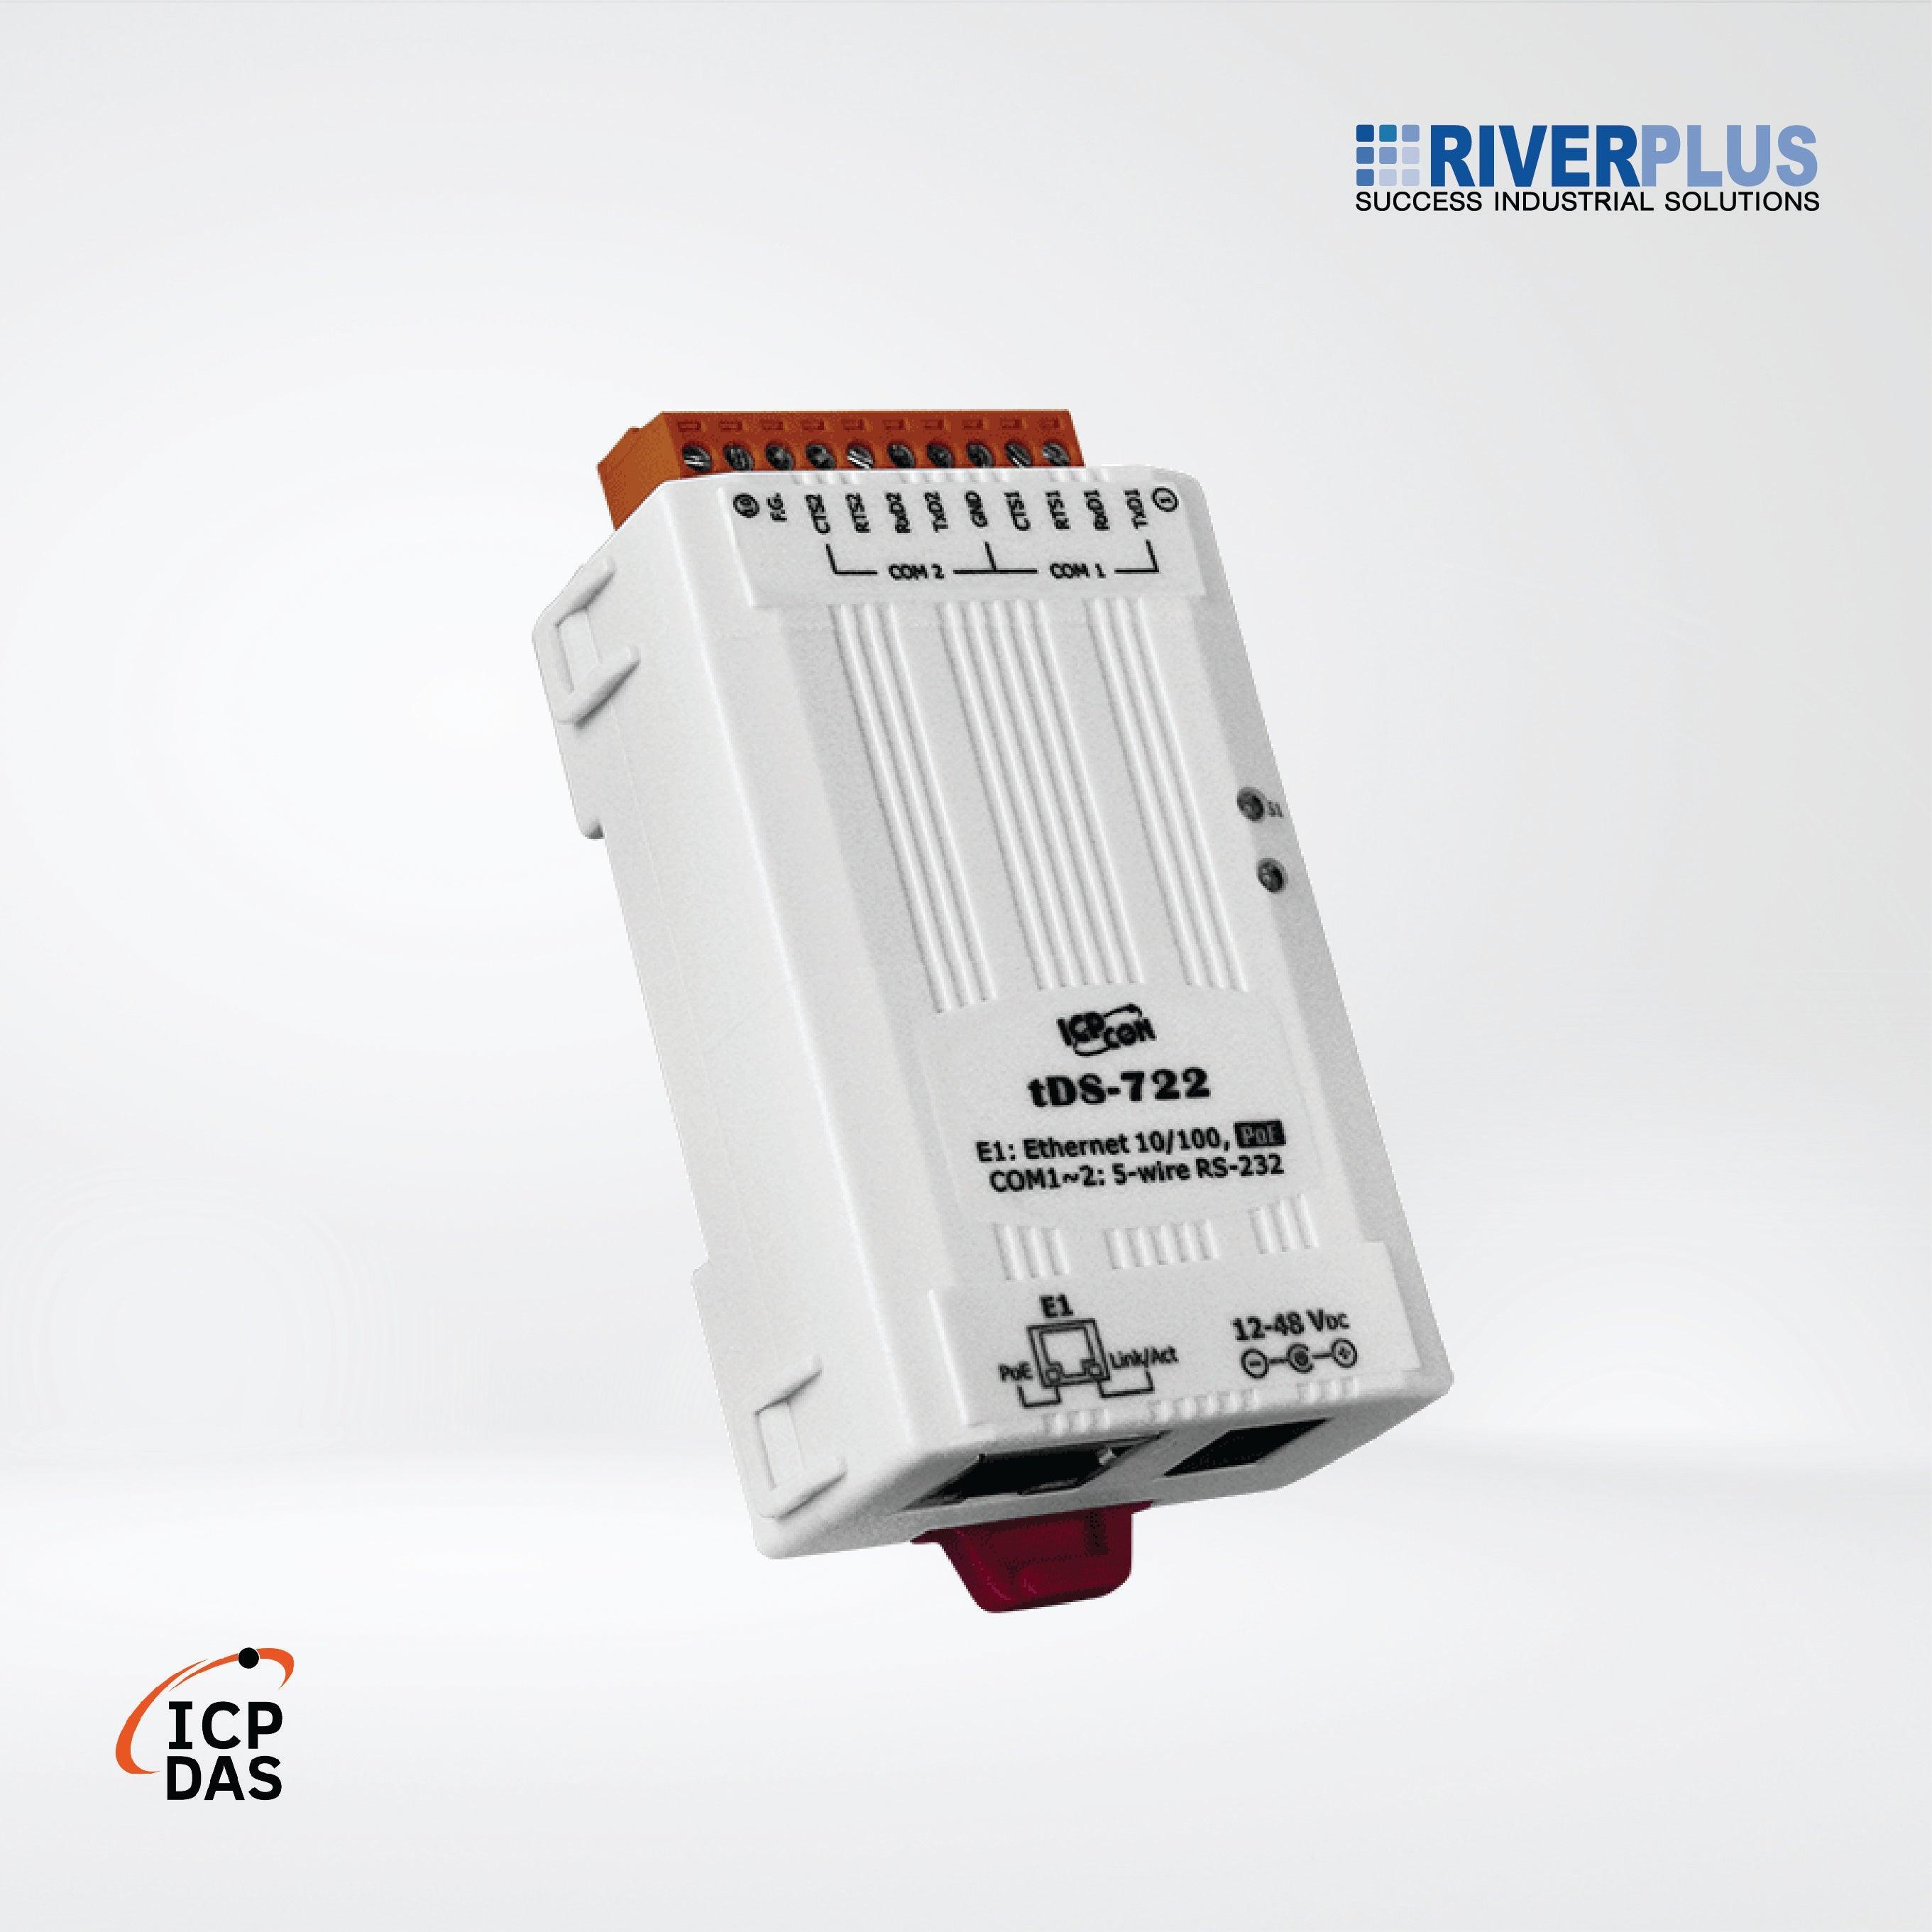 tDS-722 CR Tiny (2x RS-232) Serial-to-Ethernet Device Server with PoE - Riverplus